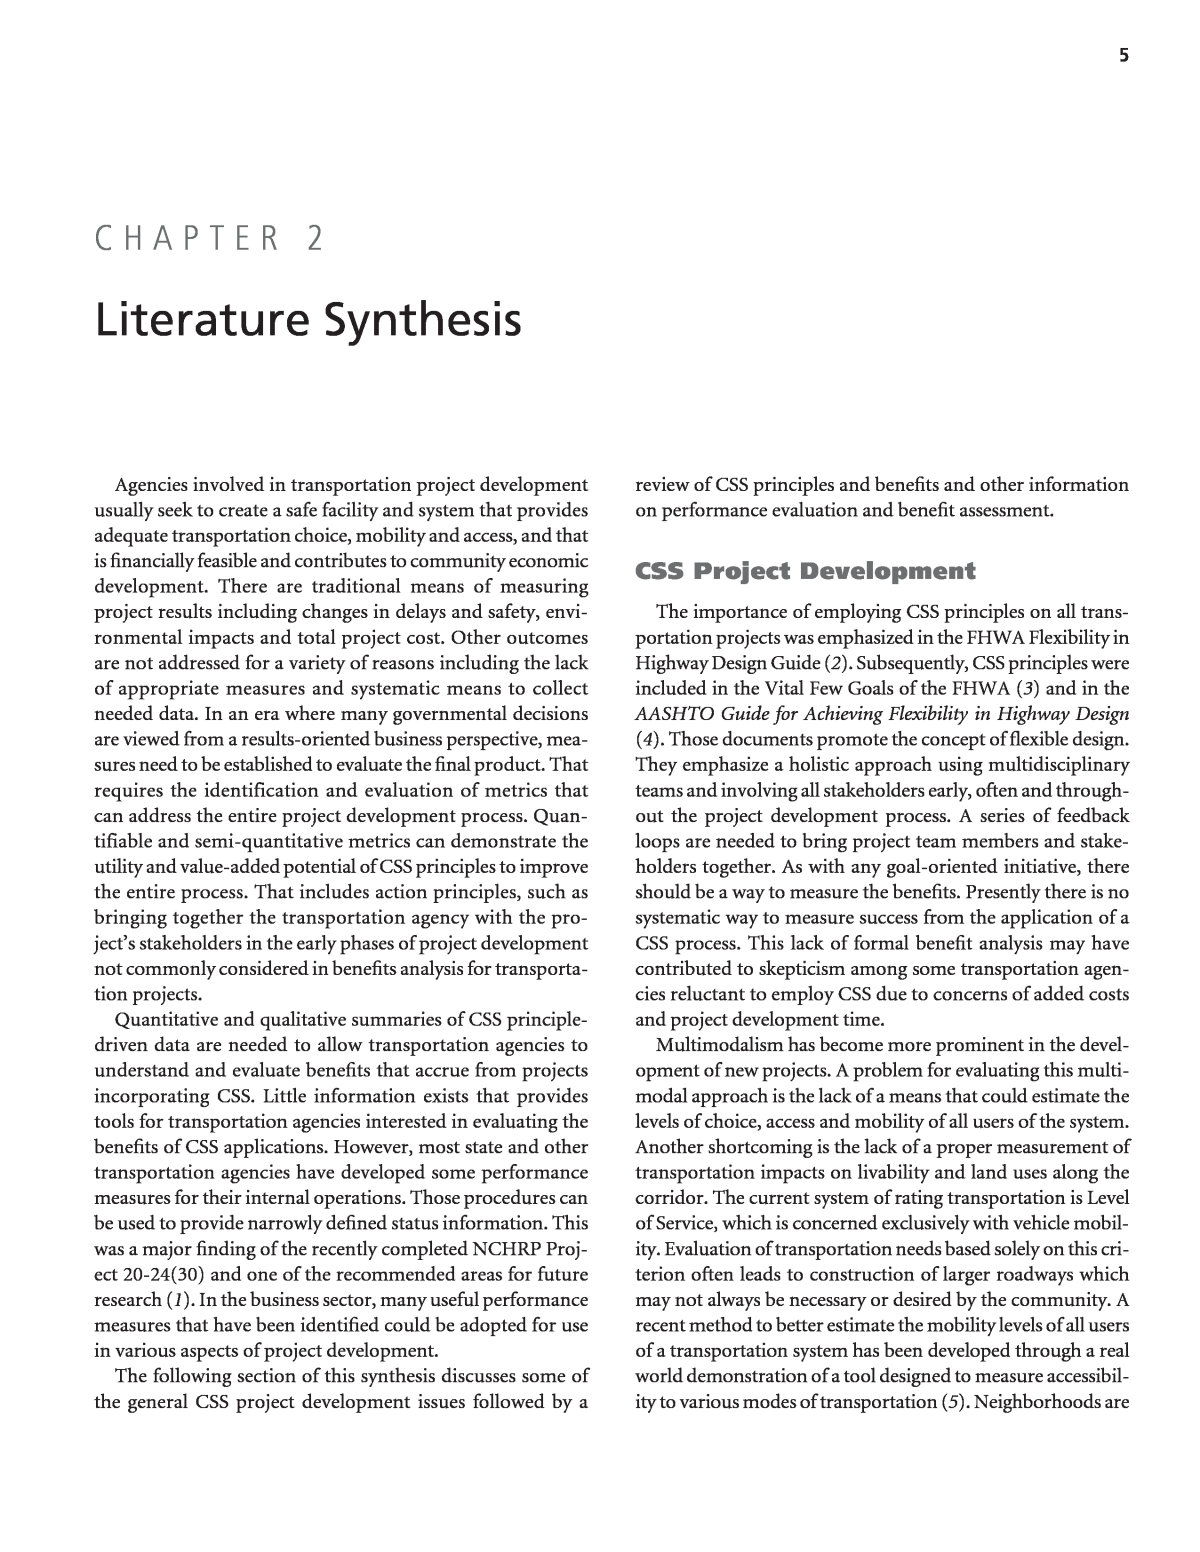 chapter-2-literature-synthesis-quantifying-the-benefits-of-context